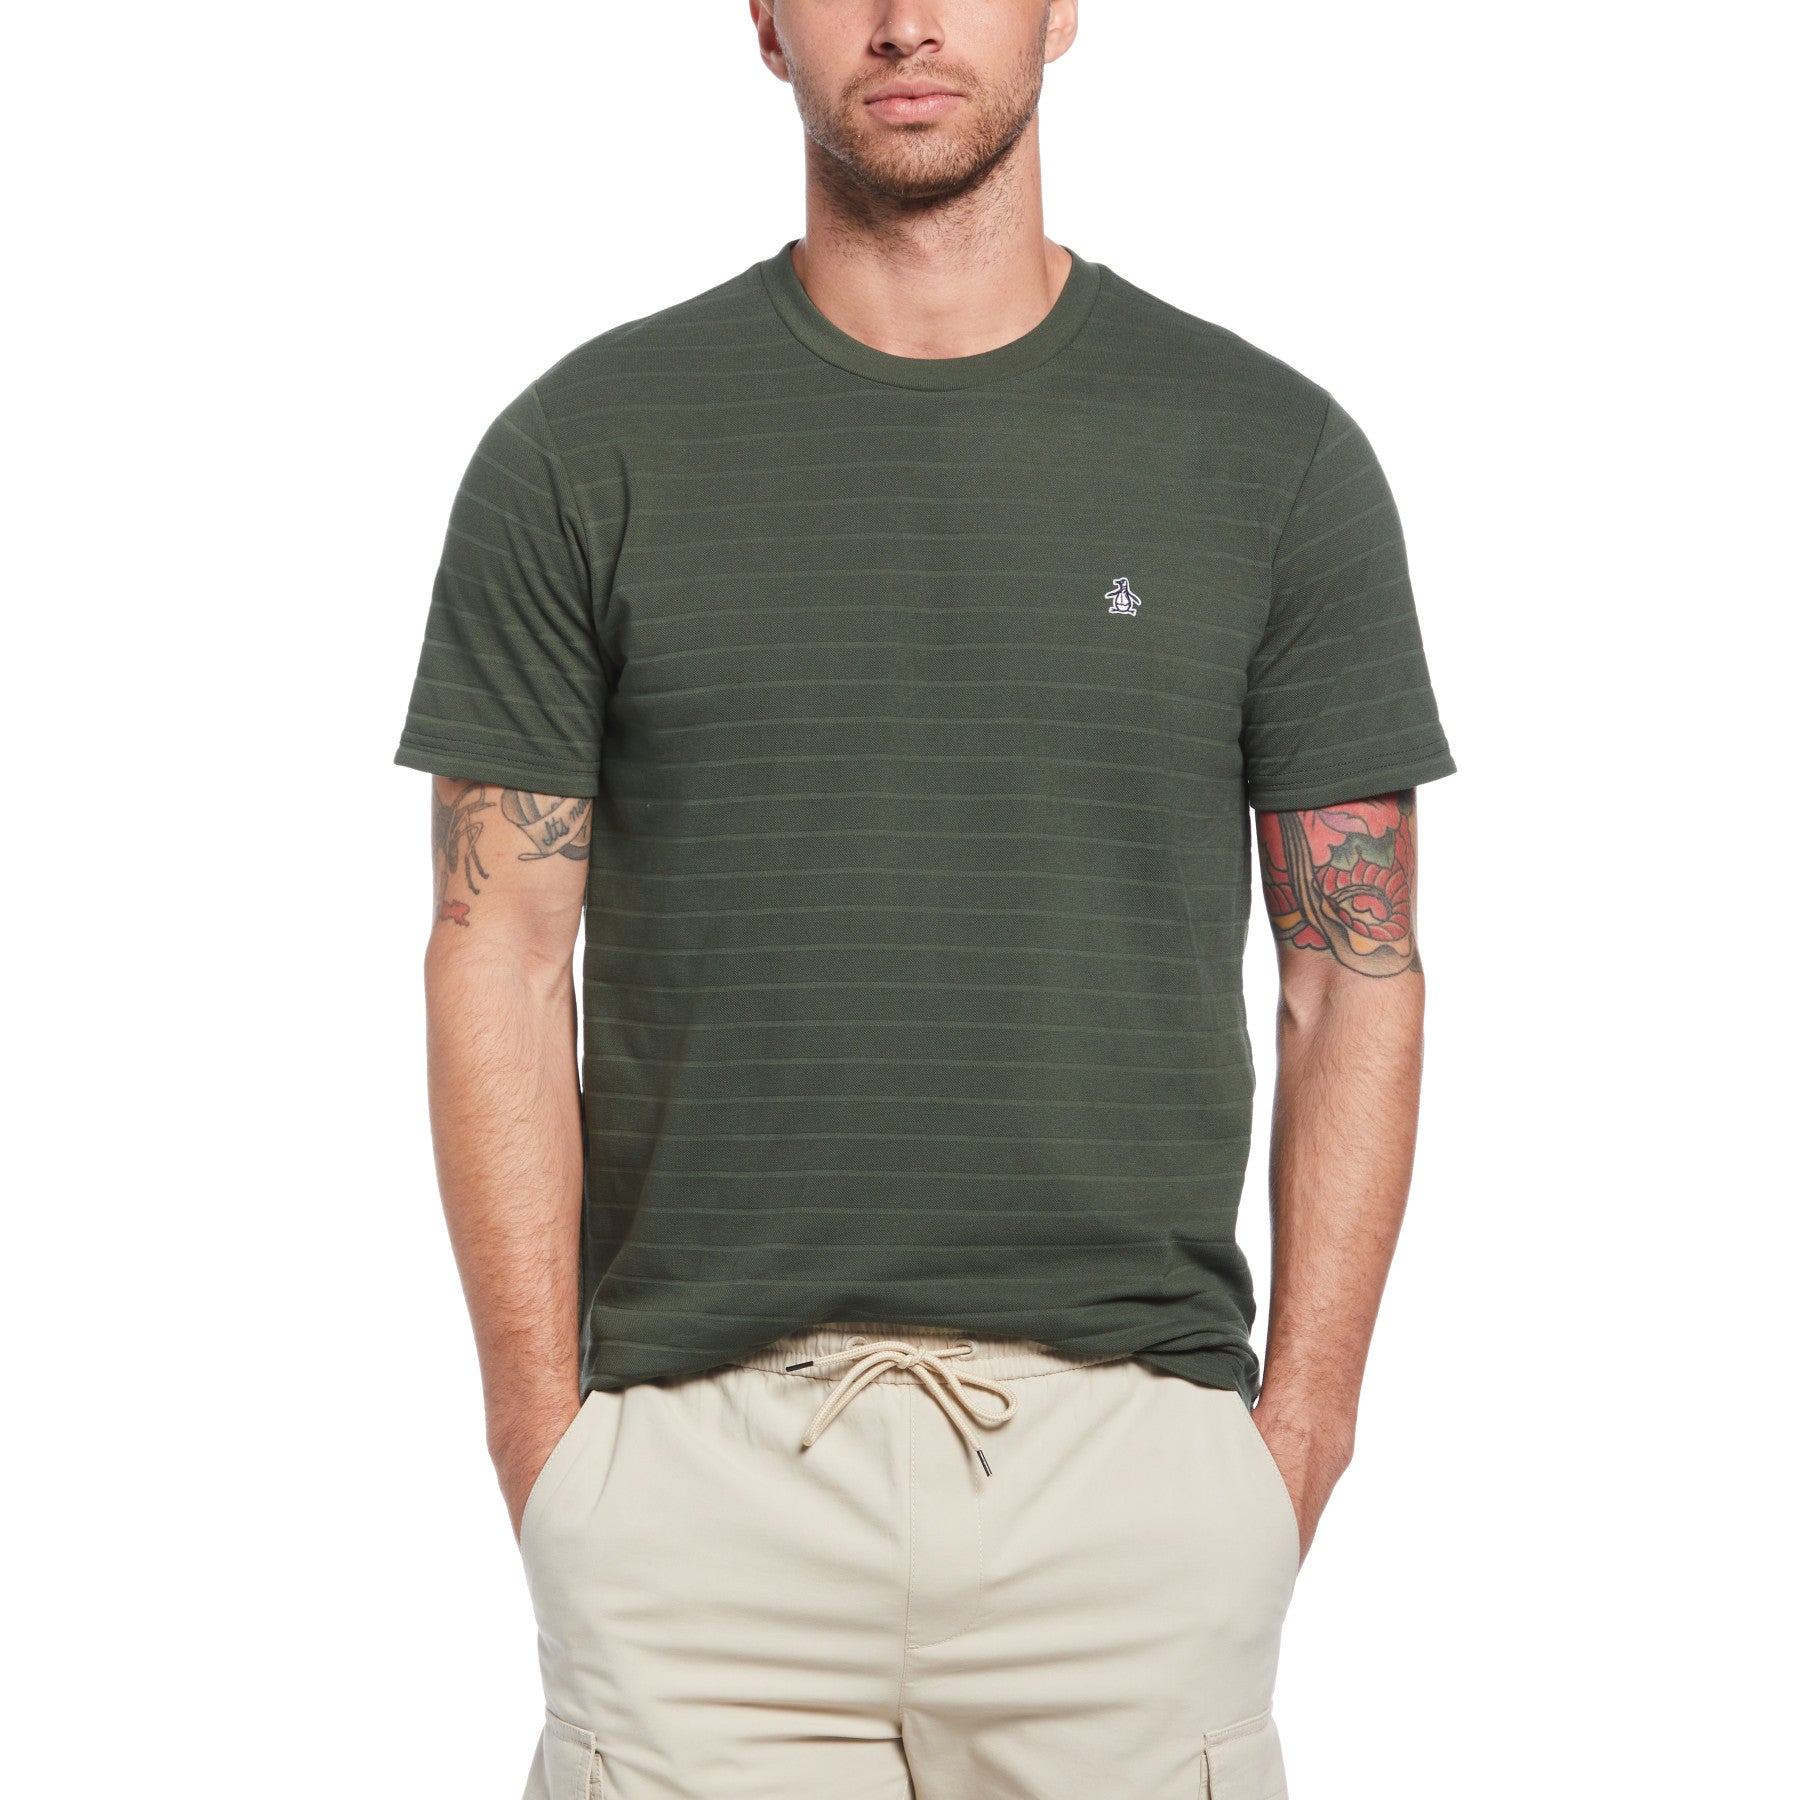 View Striped Jersey TShirt In Deep Forest information